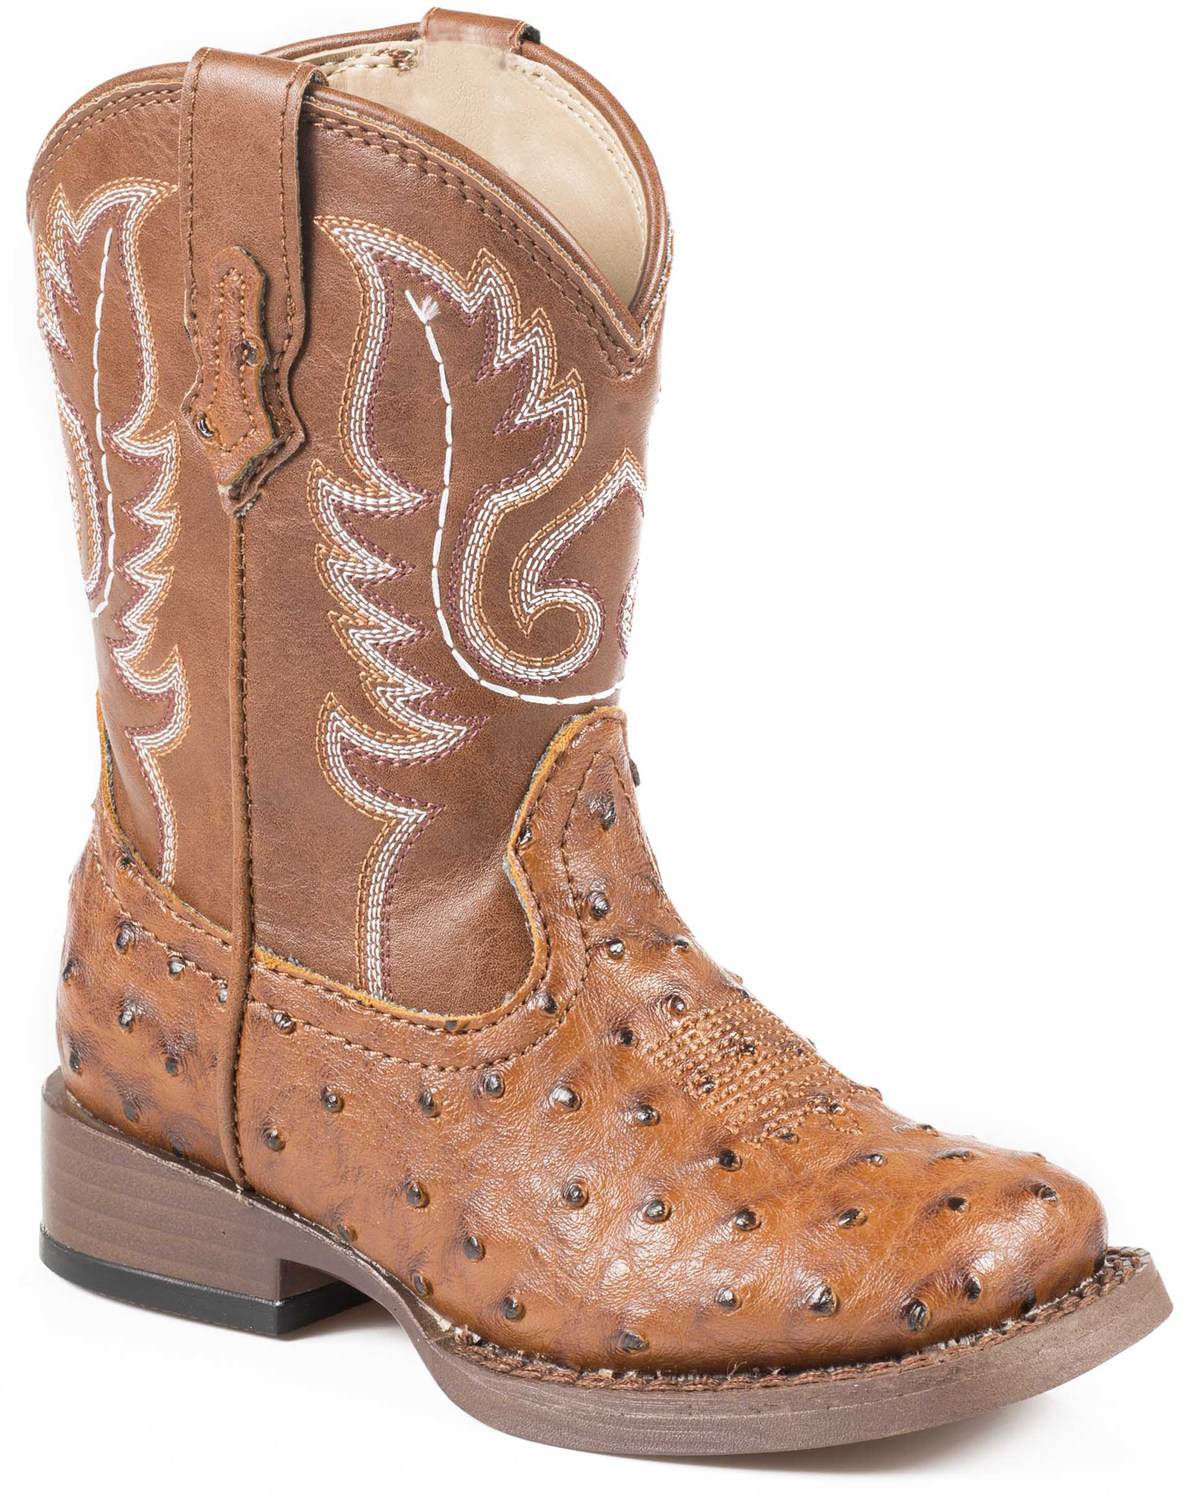 Roper Cowbaby Ostrich Western Boot Infant//Toddler